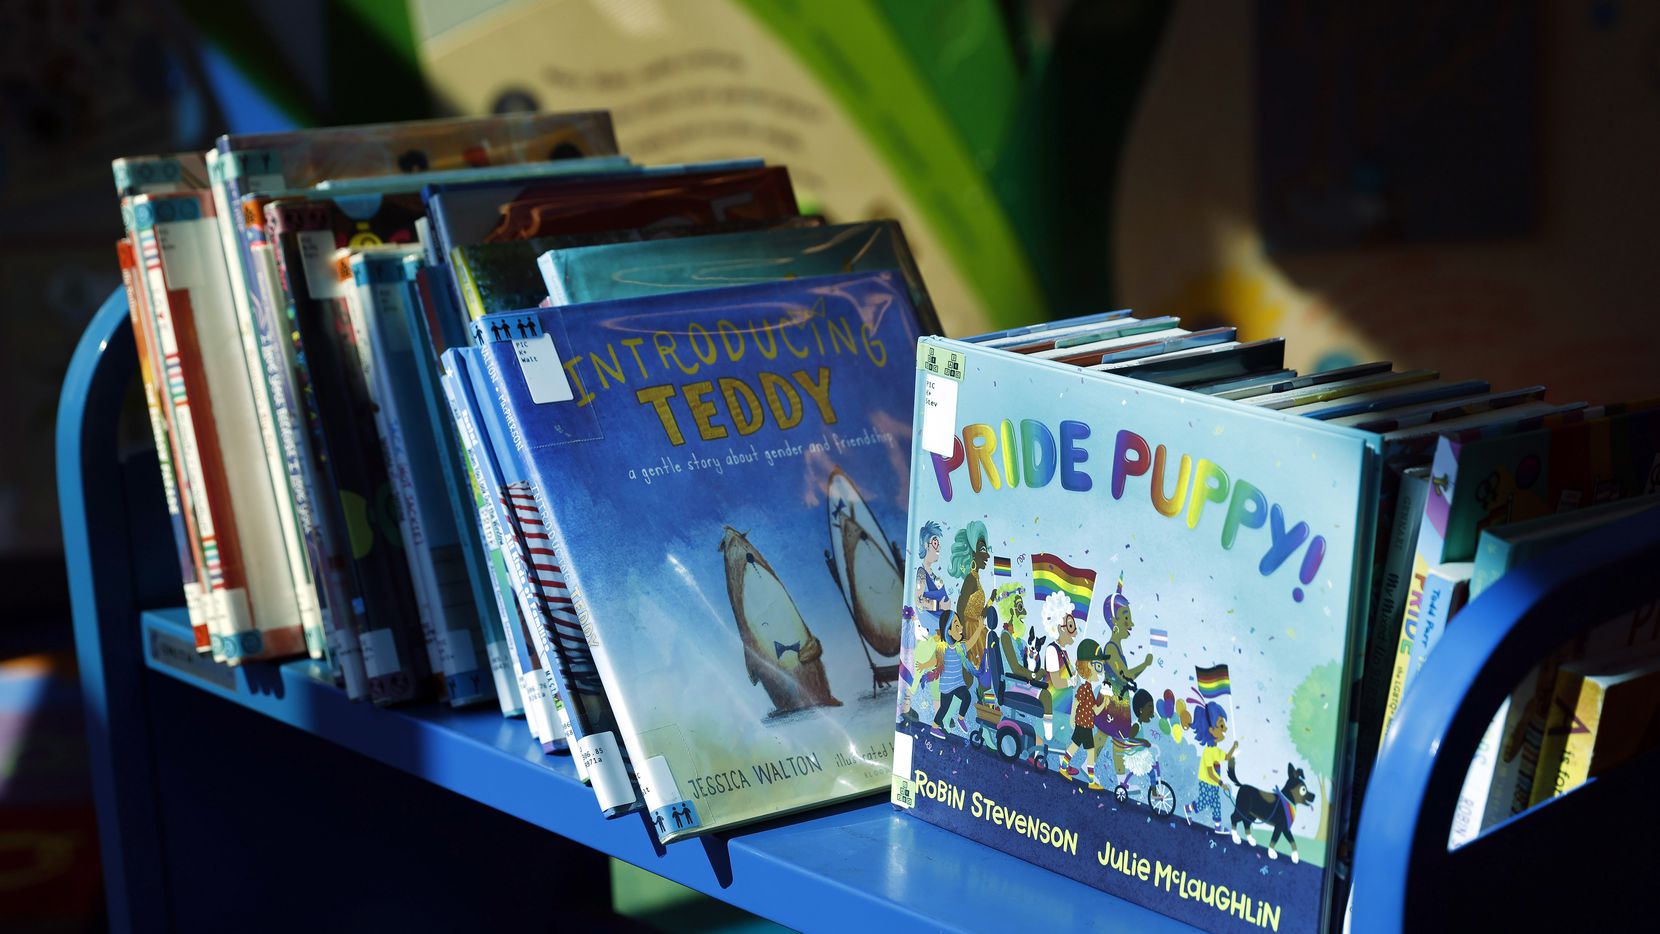 Children’s books related to LGBTQ at the George W. Hawkes Downtown Library in Arlington...